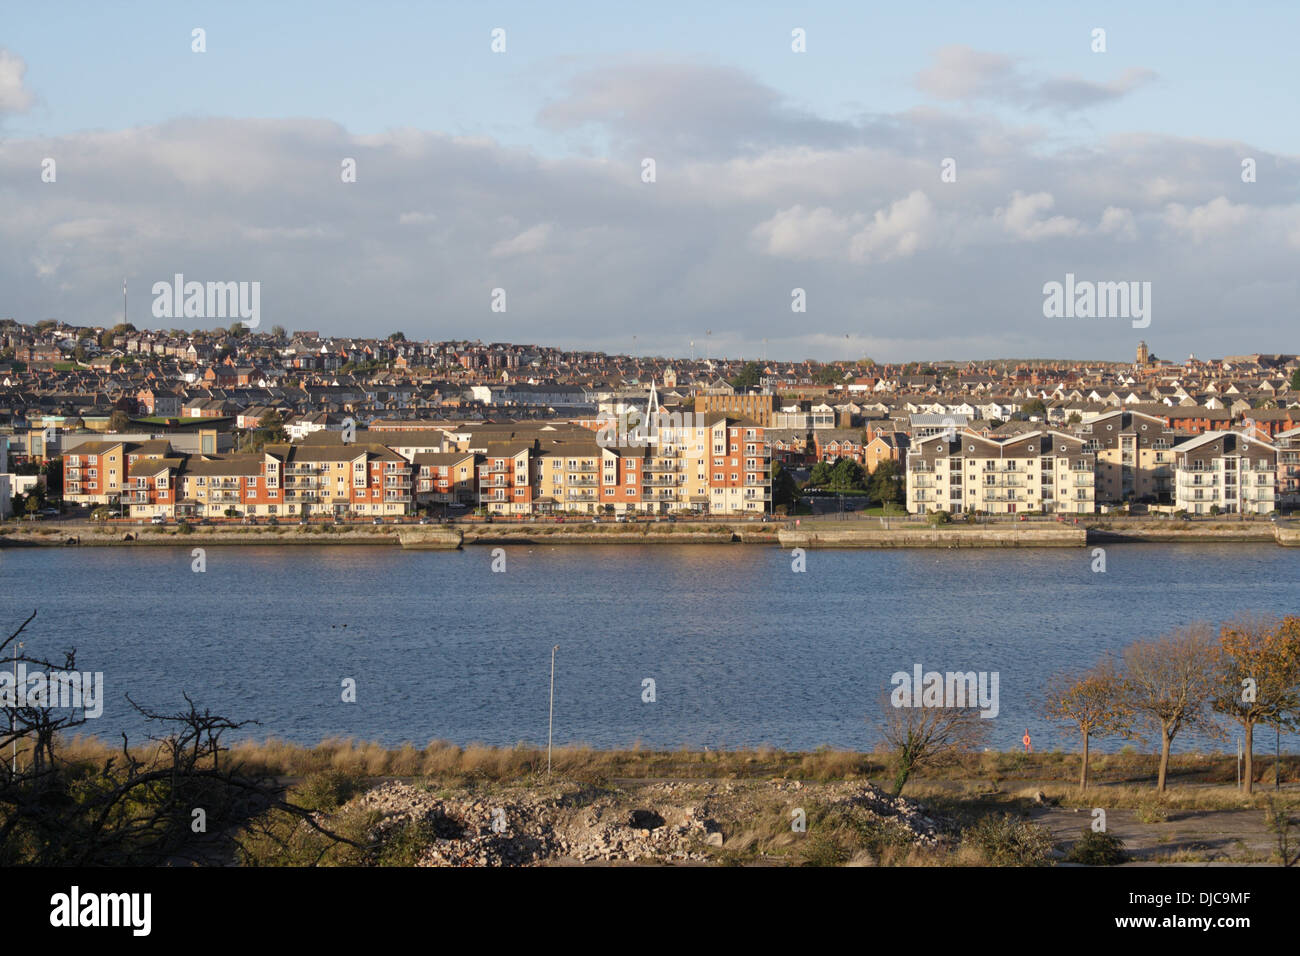 View of Barry Docks Wales showing recent Housing Developments Stock Photo